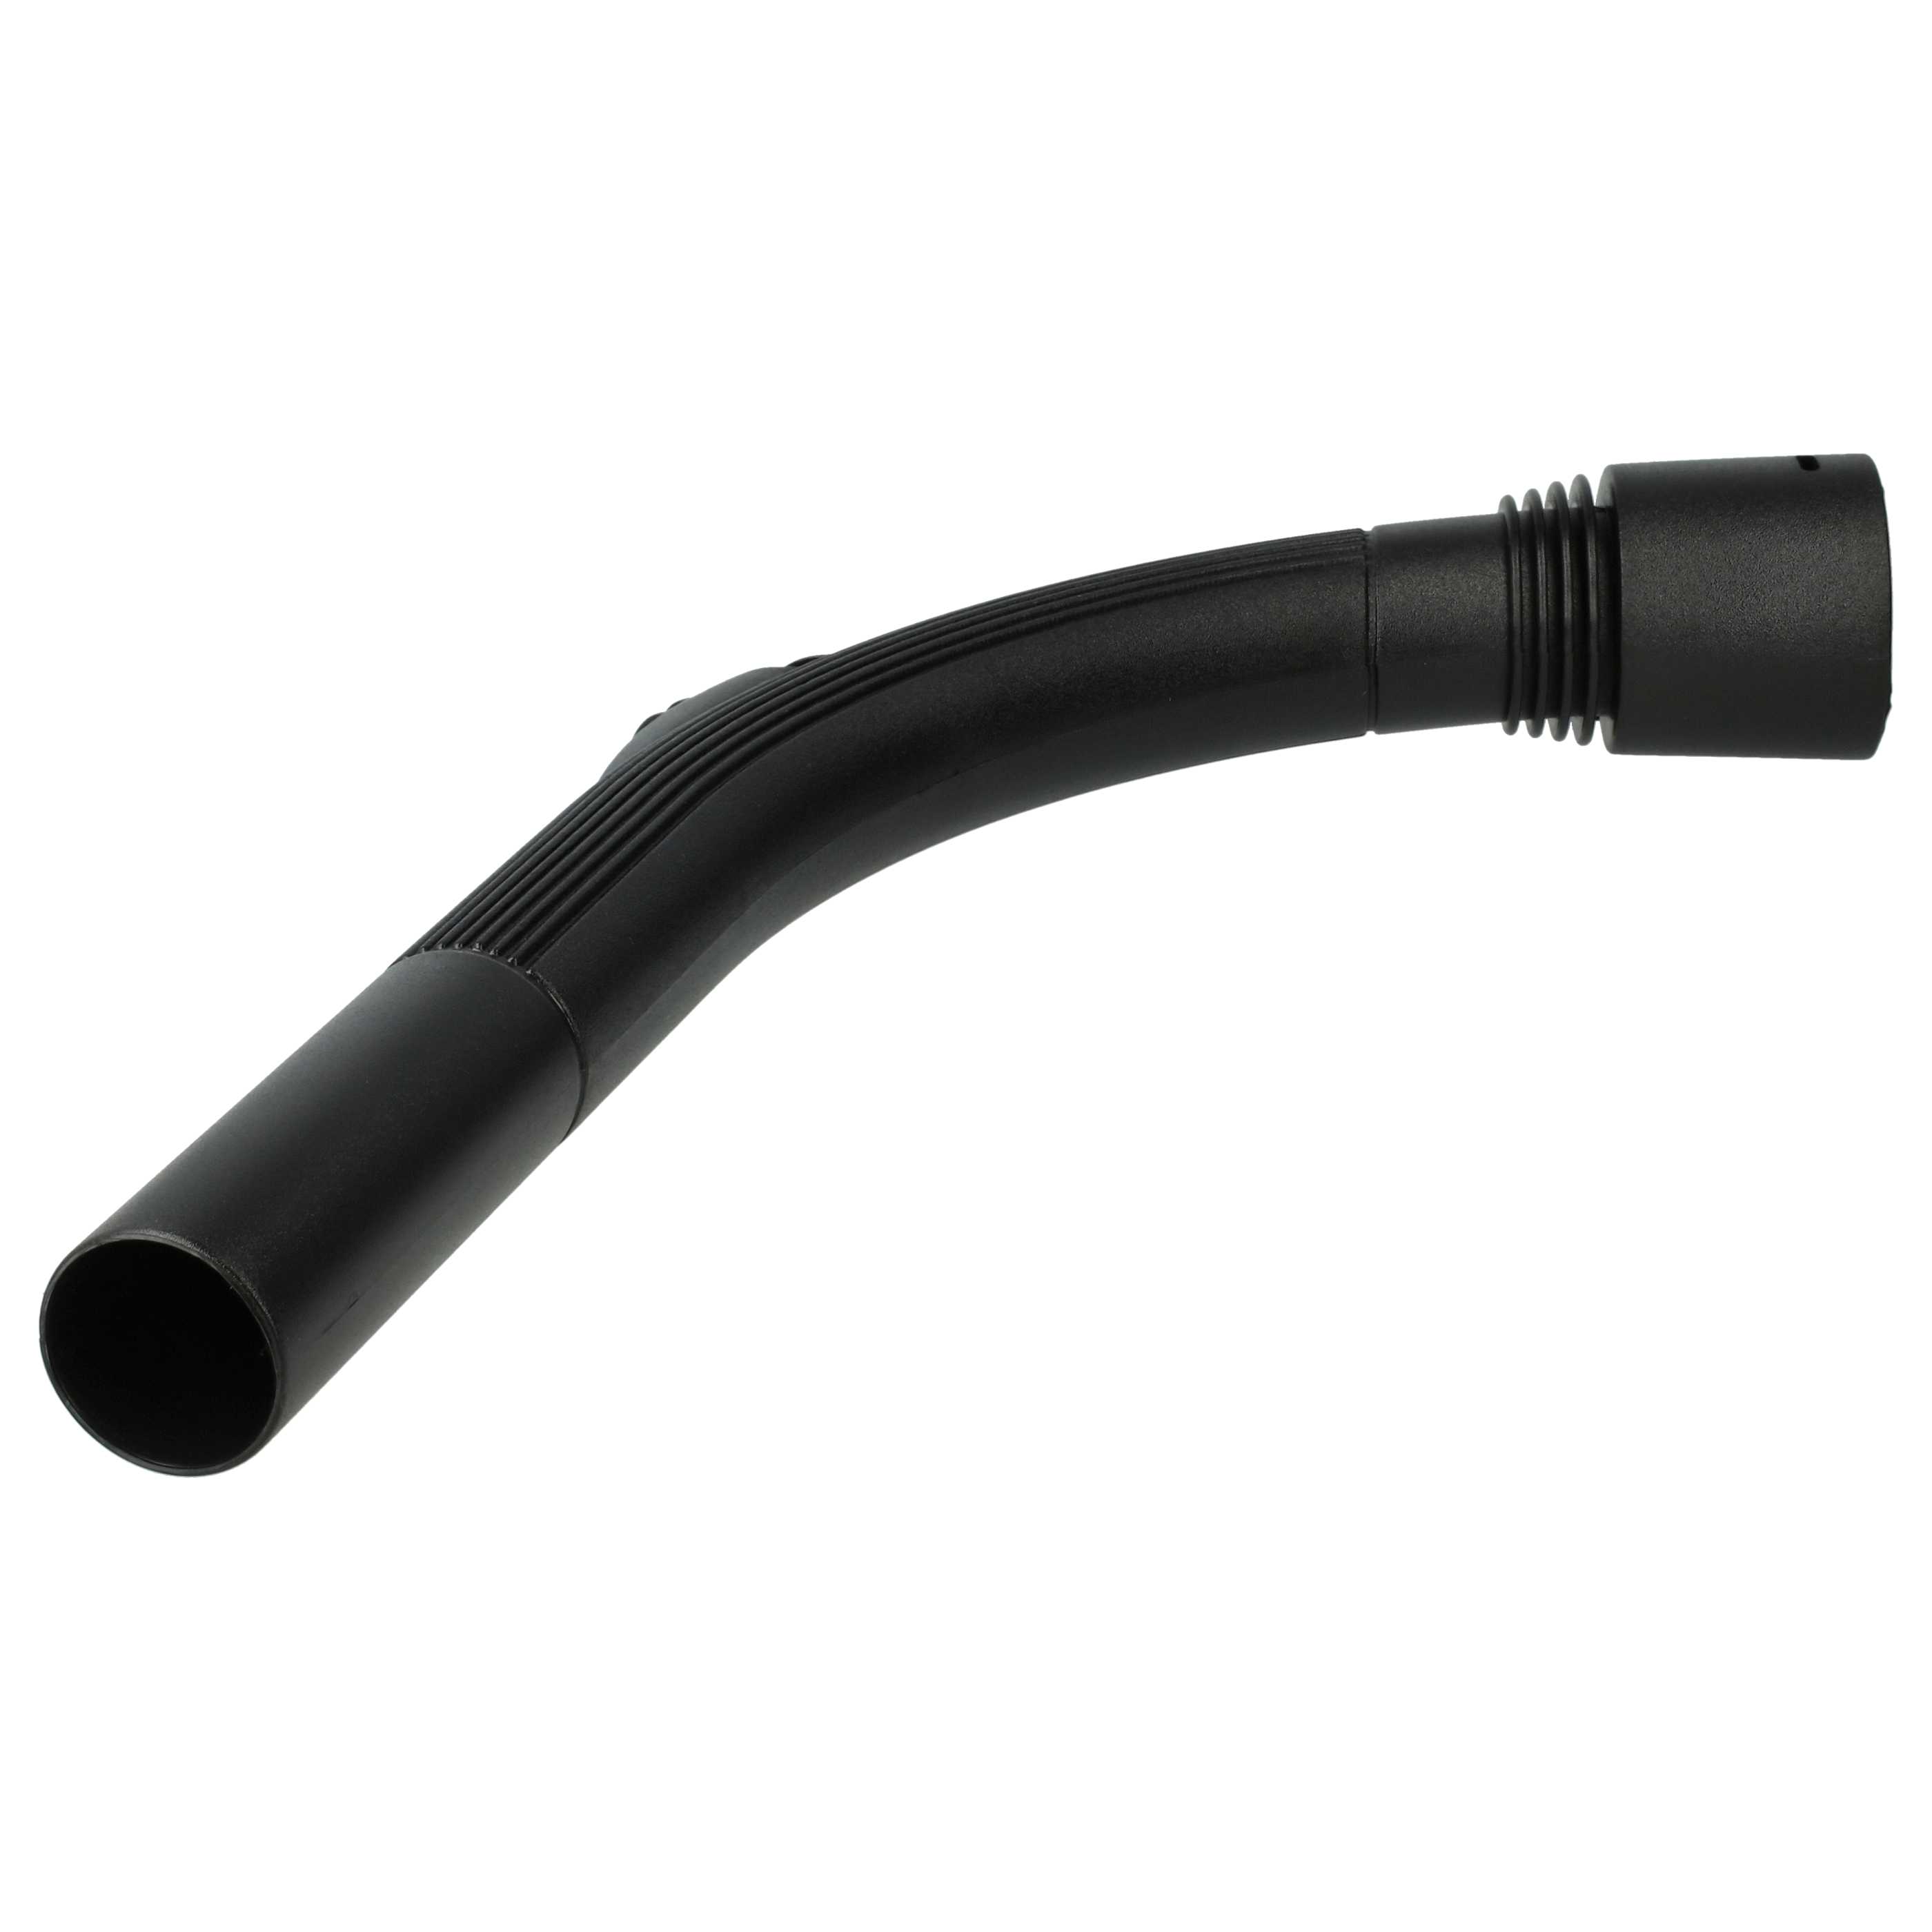 Vacuum Cleaner Handle as Replacement for Dirt Devil Vacuum Cleaner Handle 50100215035021 32 mm Diameter